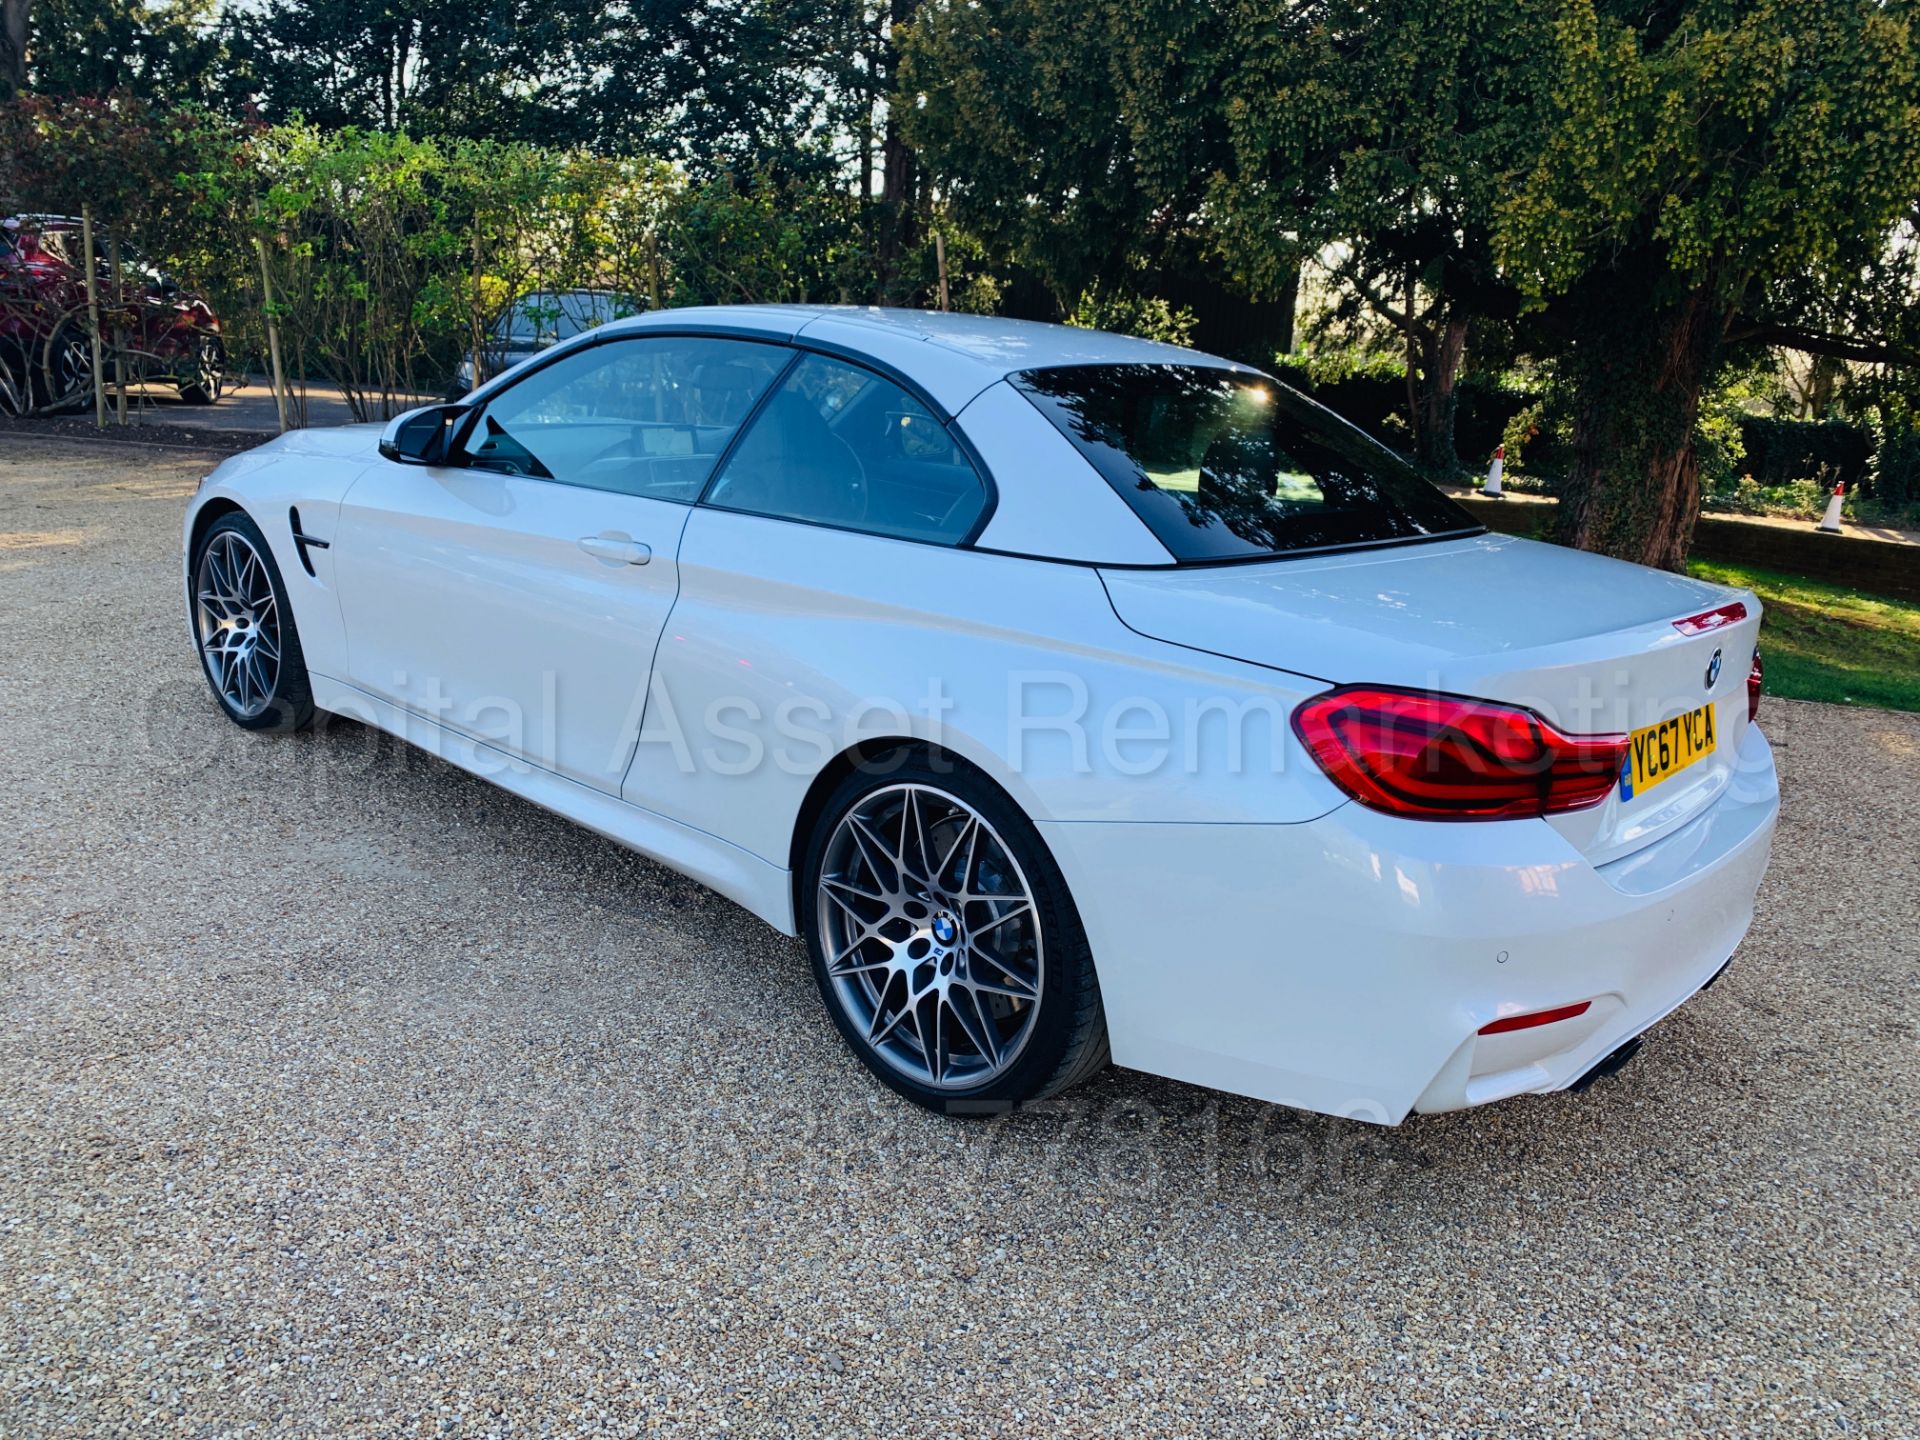 ON SALE BMW M4 CONVERTIBLE *COMPETITION PACKAGE* (2018 MODEL) '431 BHP - M DCT AUTO' WOW!!!!! - Image 10 of 89